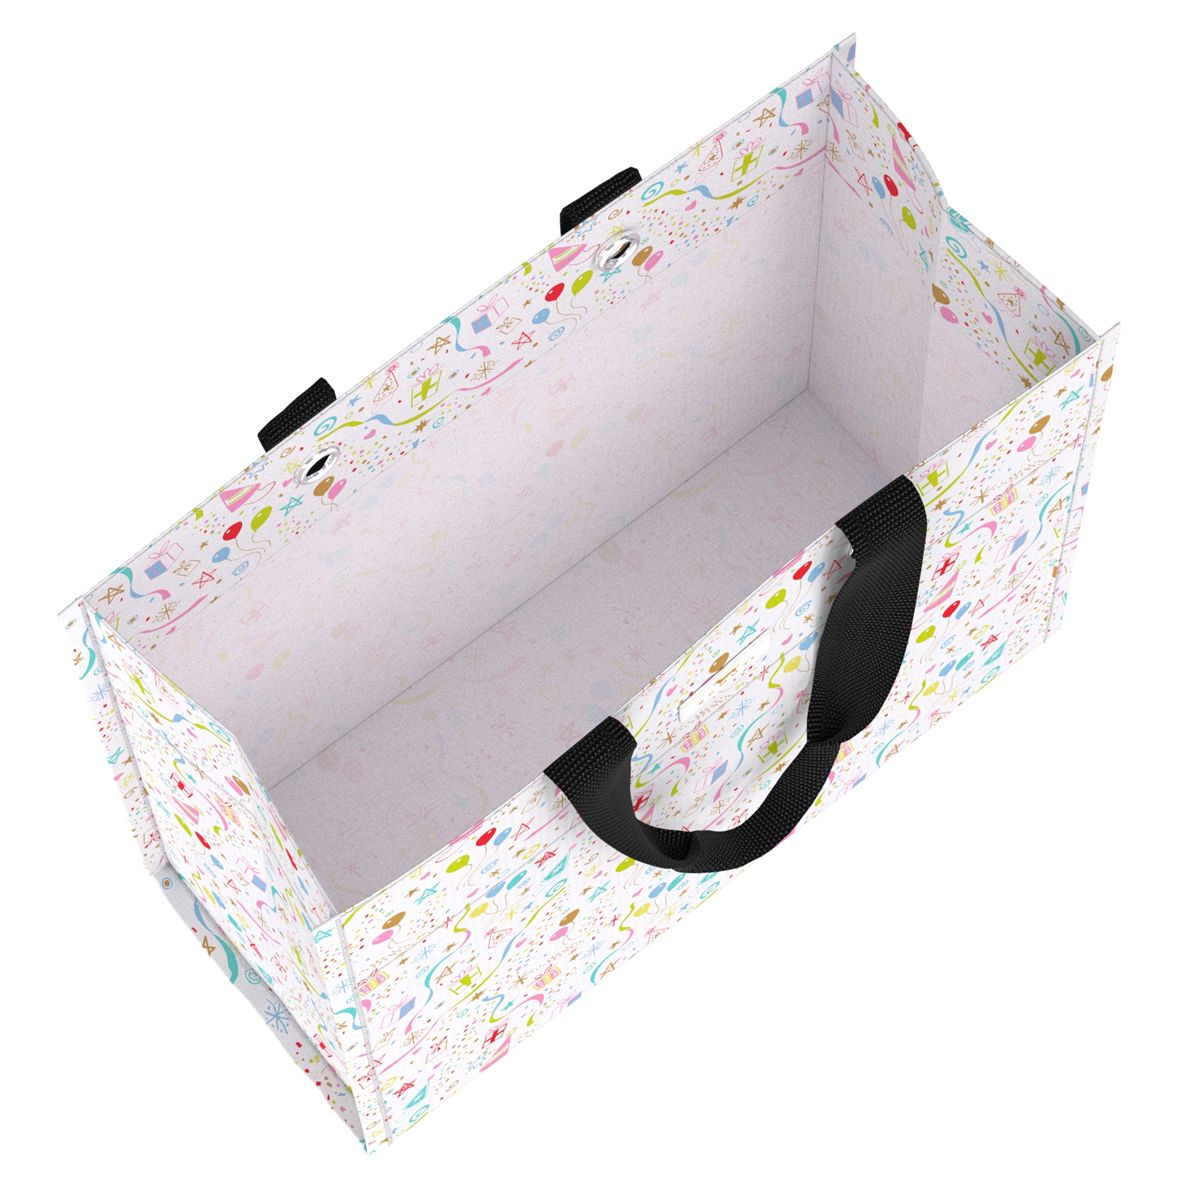 Large Package Gift Bag by Scout - Celebration  is